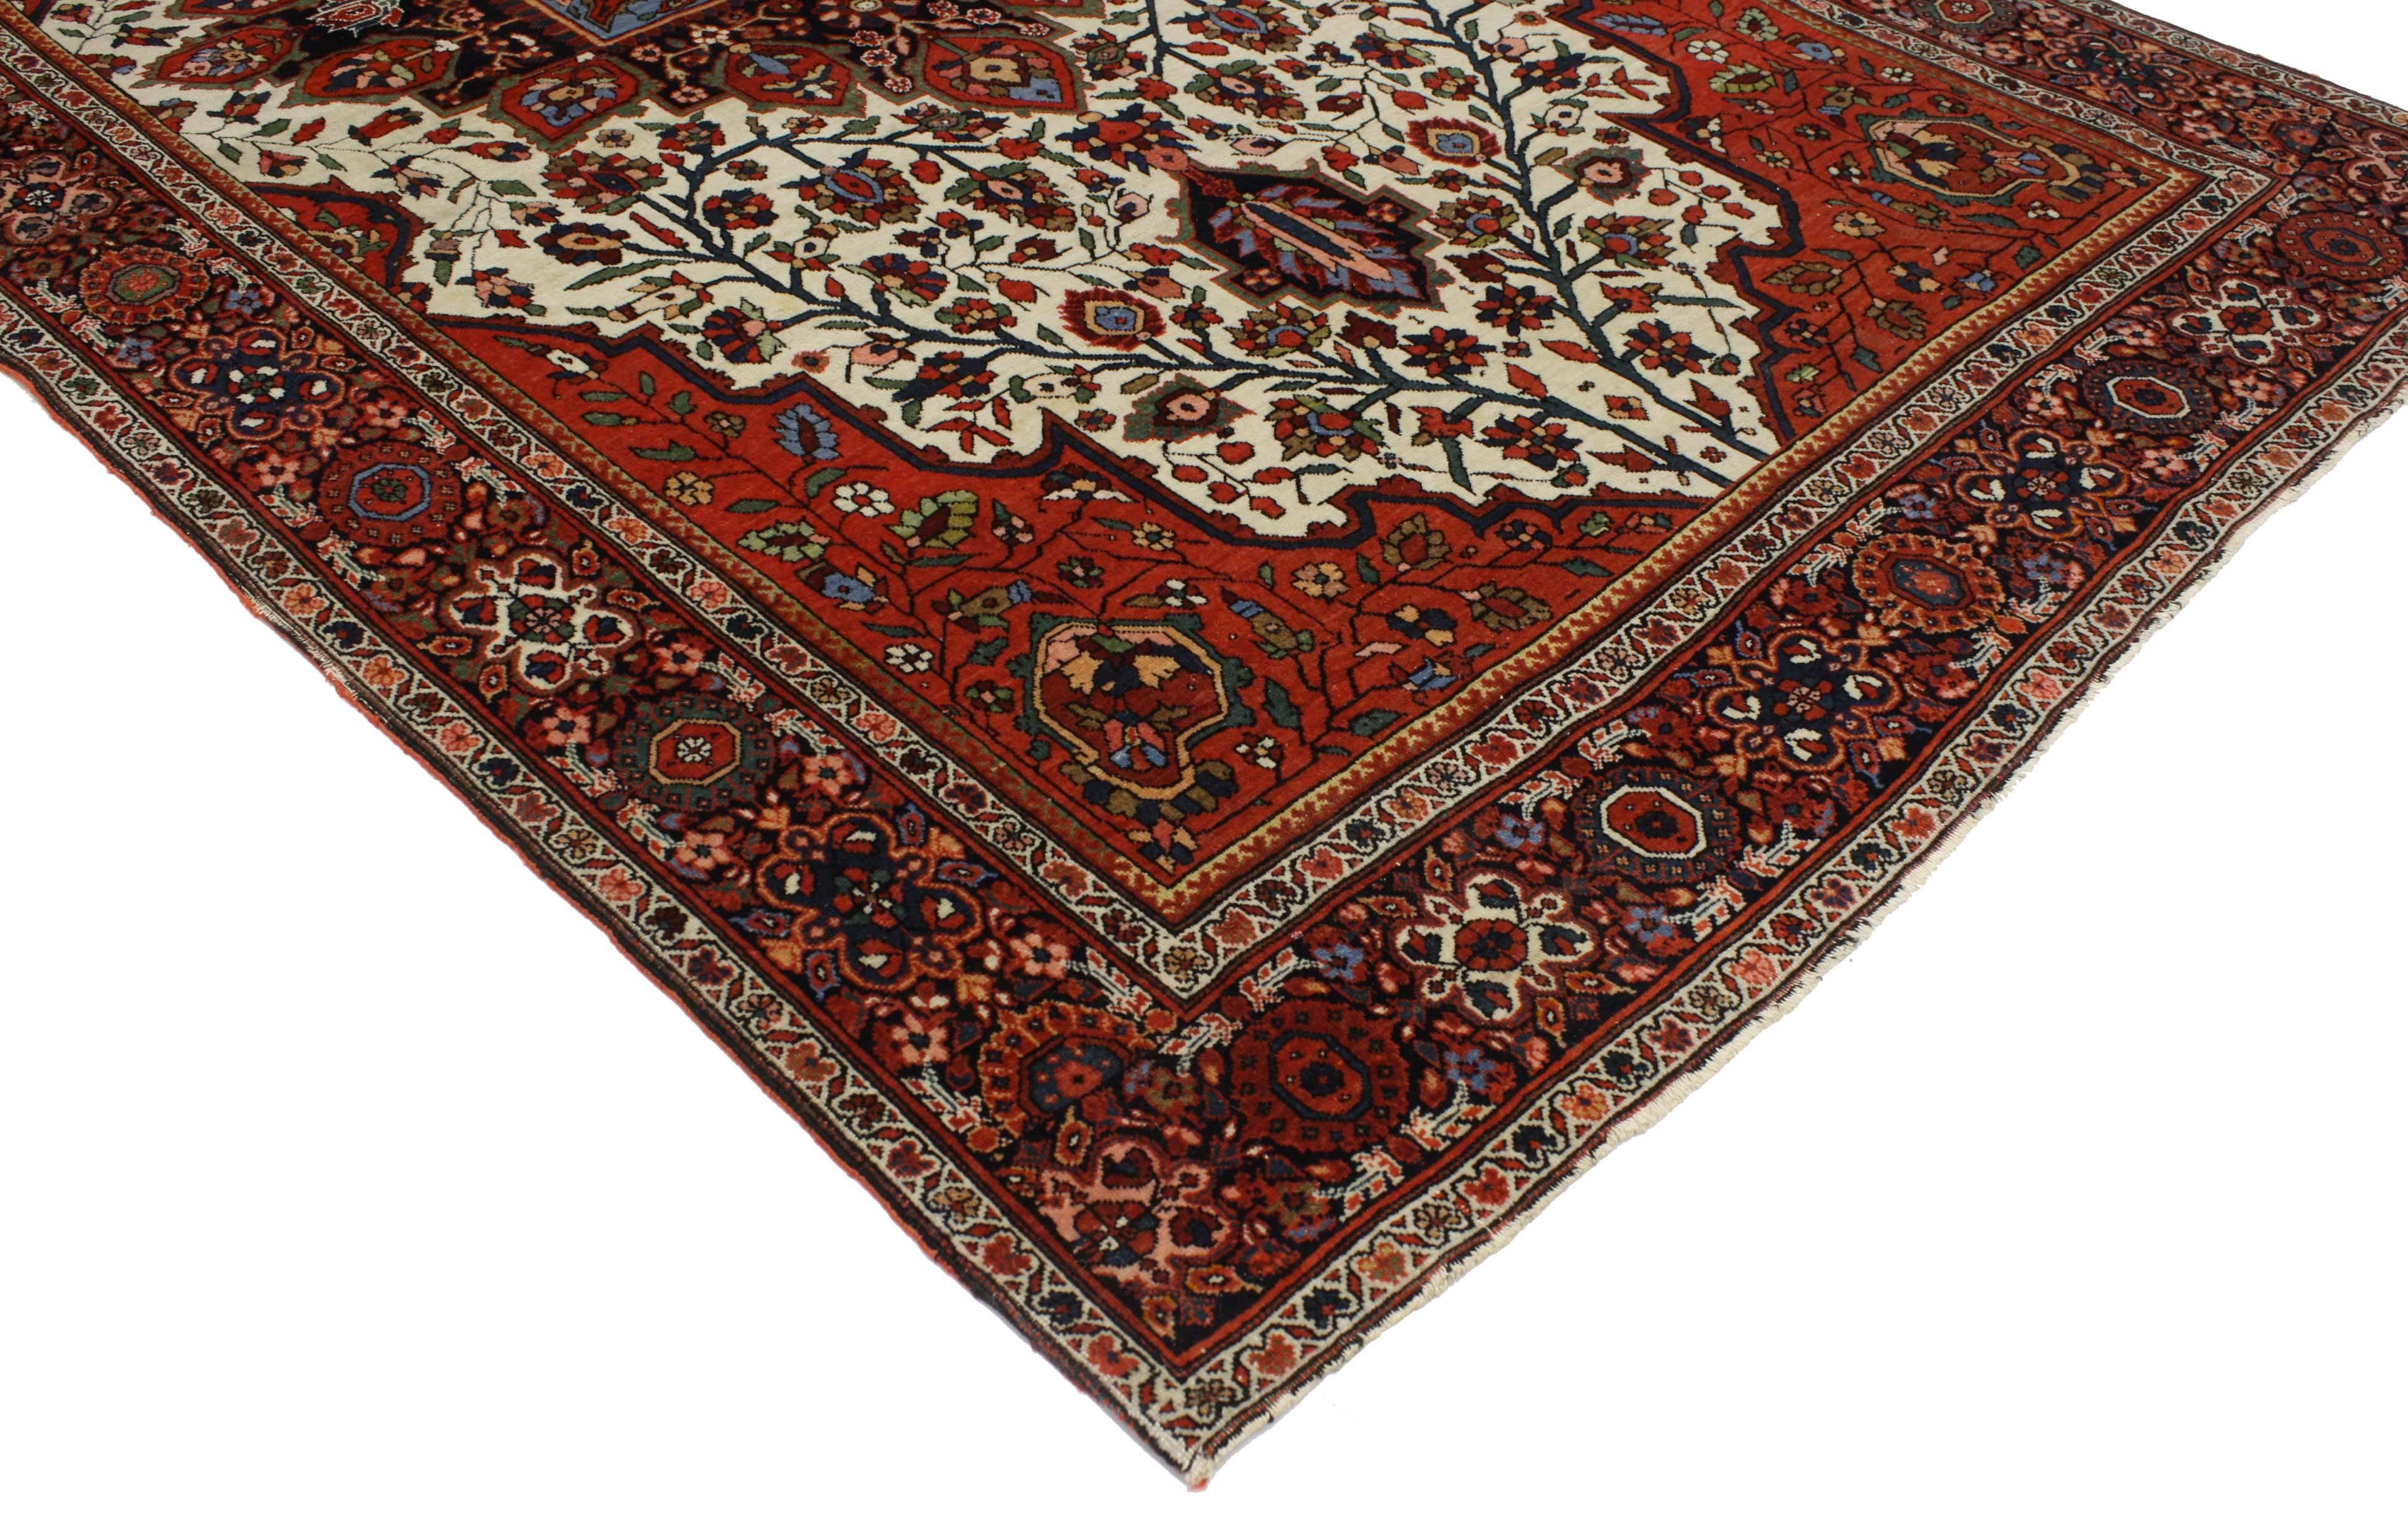 This highly desirable antique Persian Sarouk Farahan rug features an intricate center medallion with modern style. A traditional color palette illuminates its lively, composition. The ornate medallion is surrounded by geometric motifs and vine